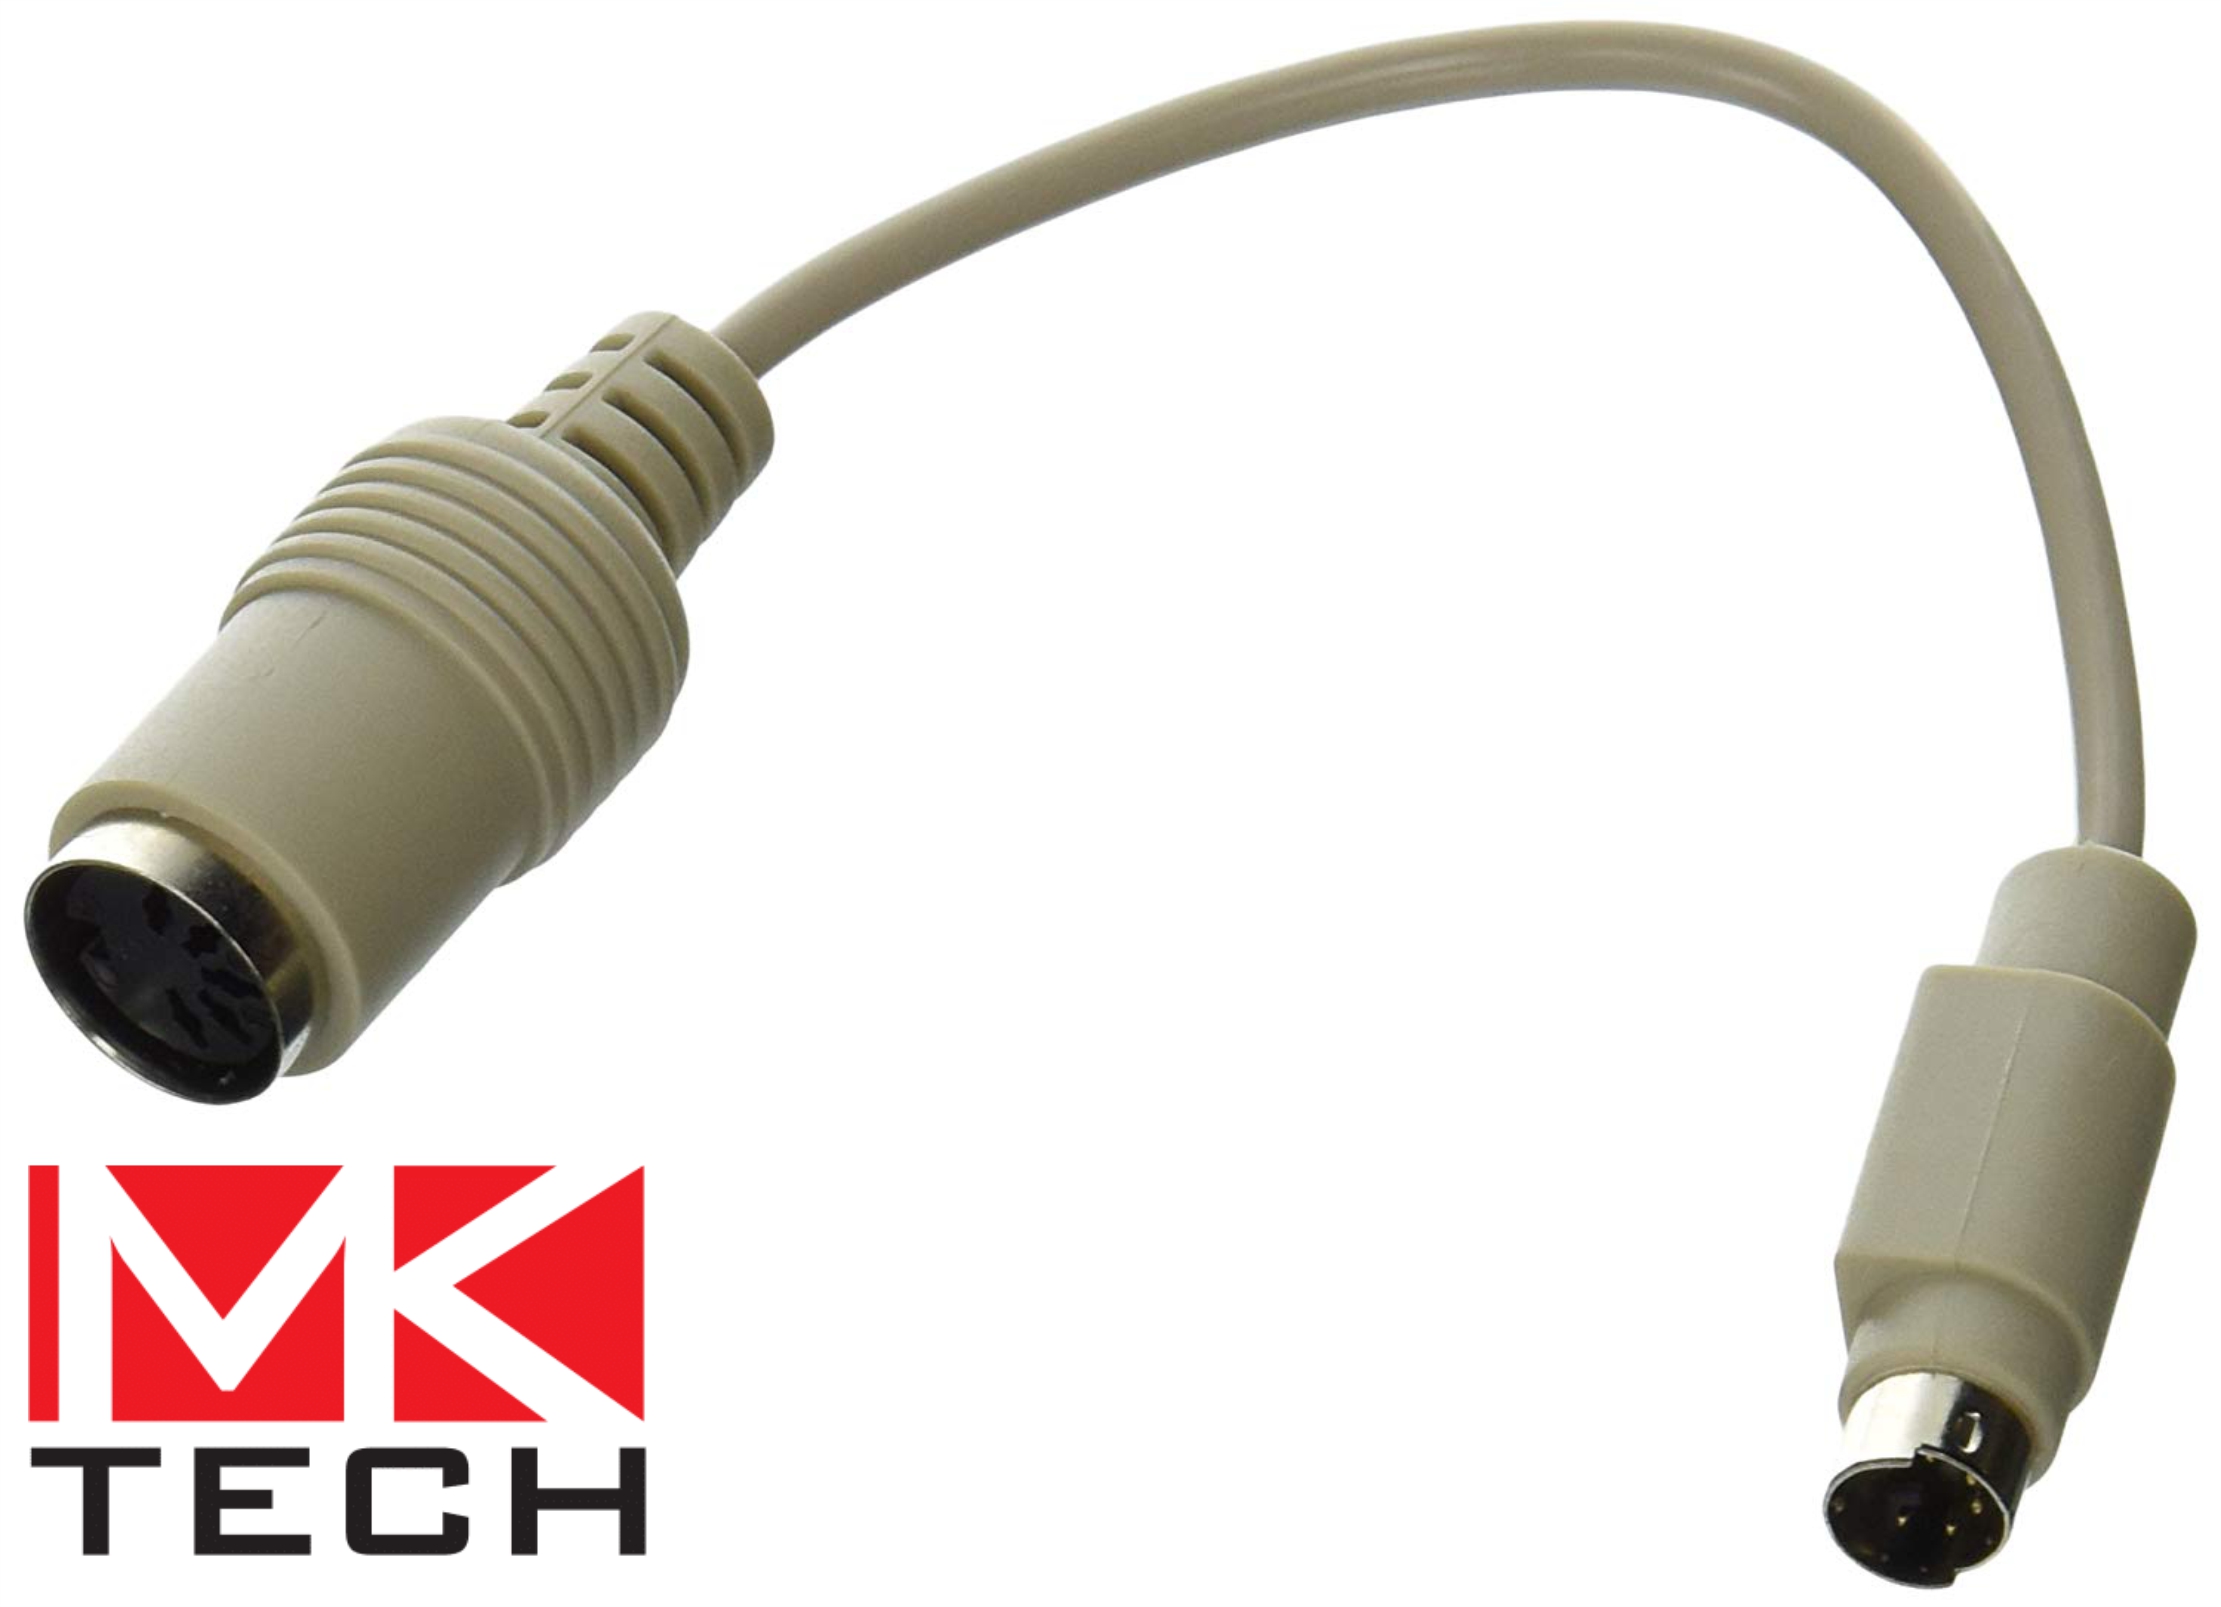 6-AT Female to PS2 Male Keyboard Adapter MKTECH